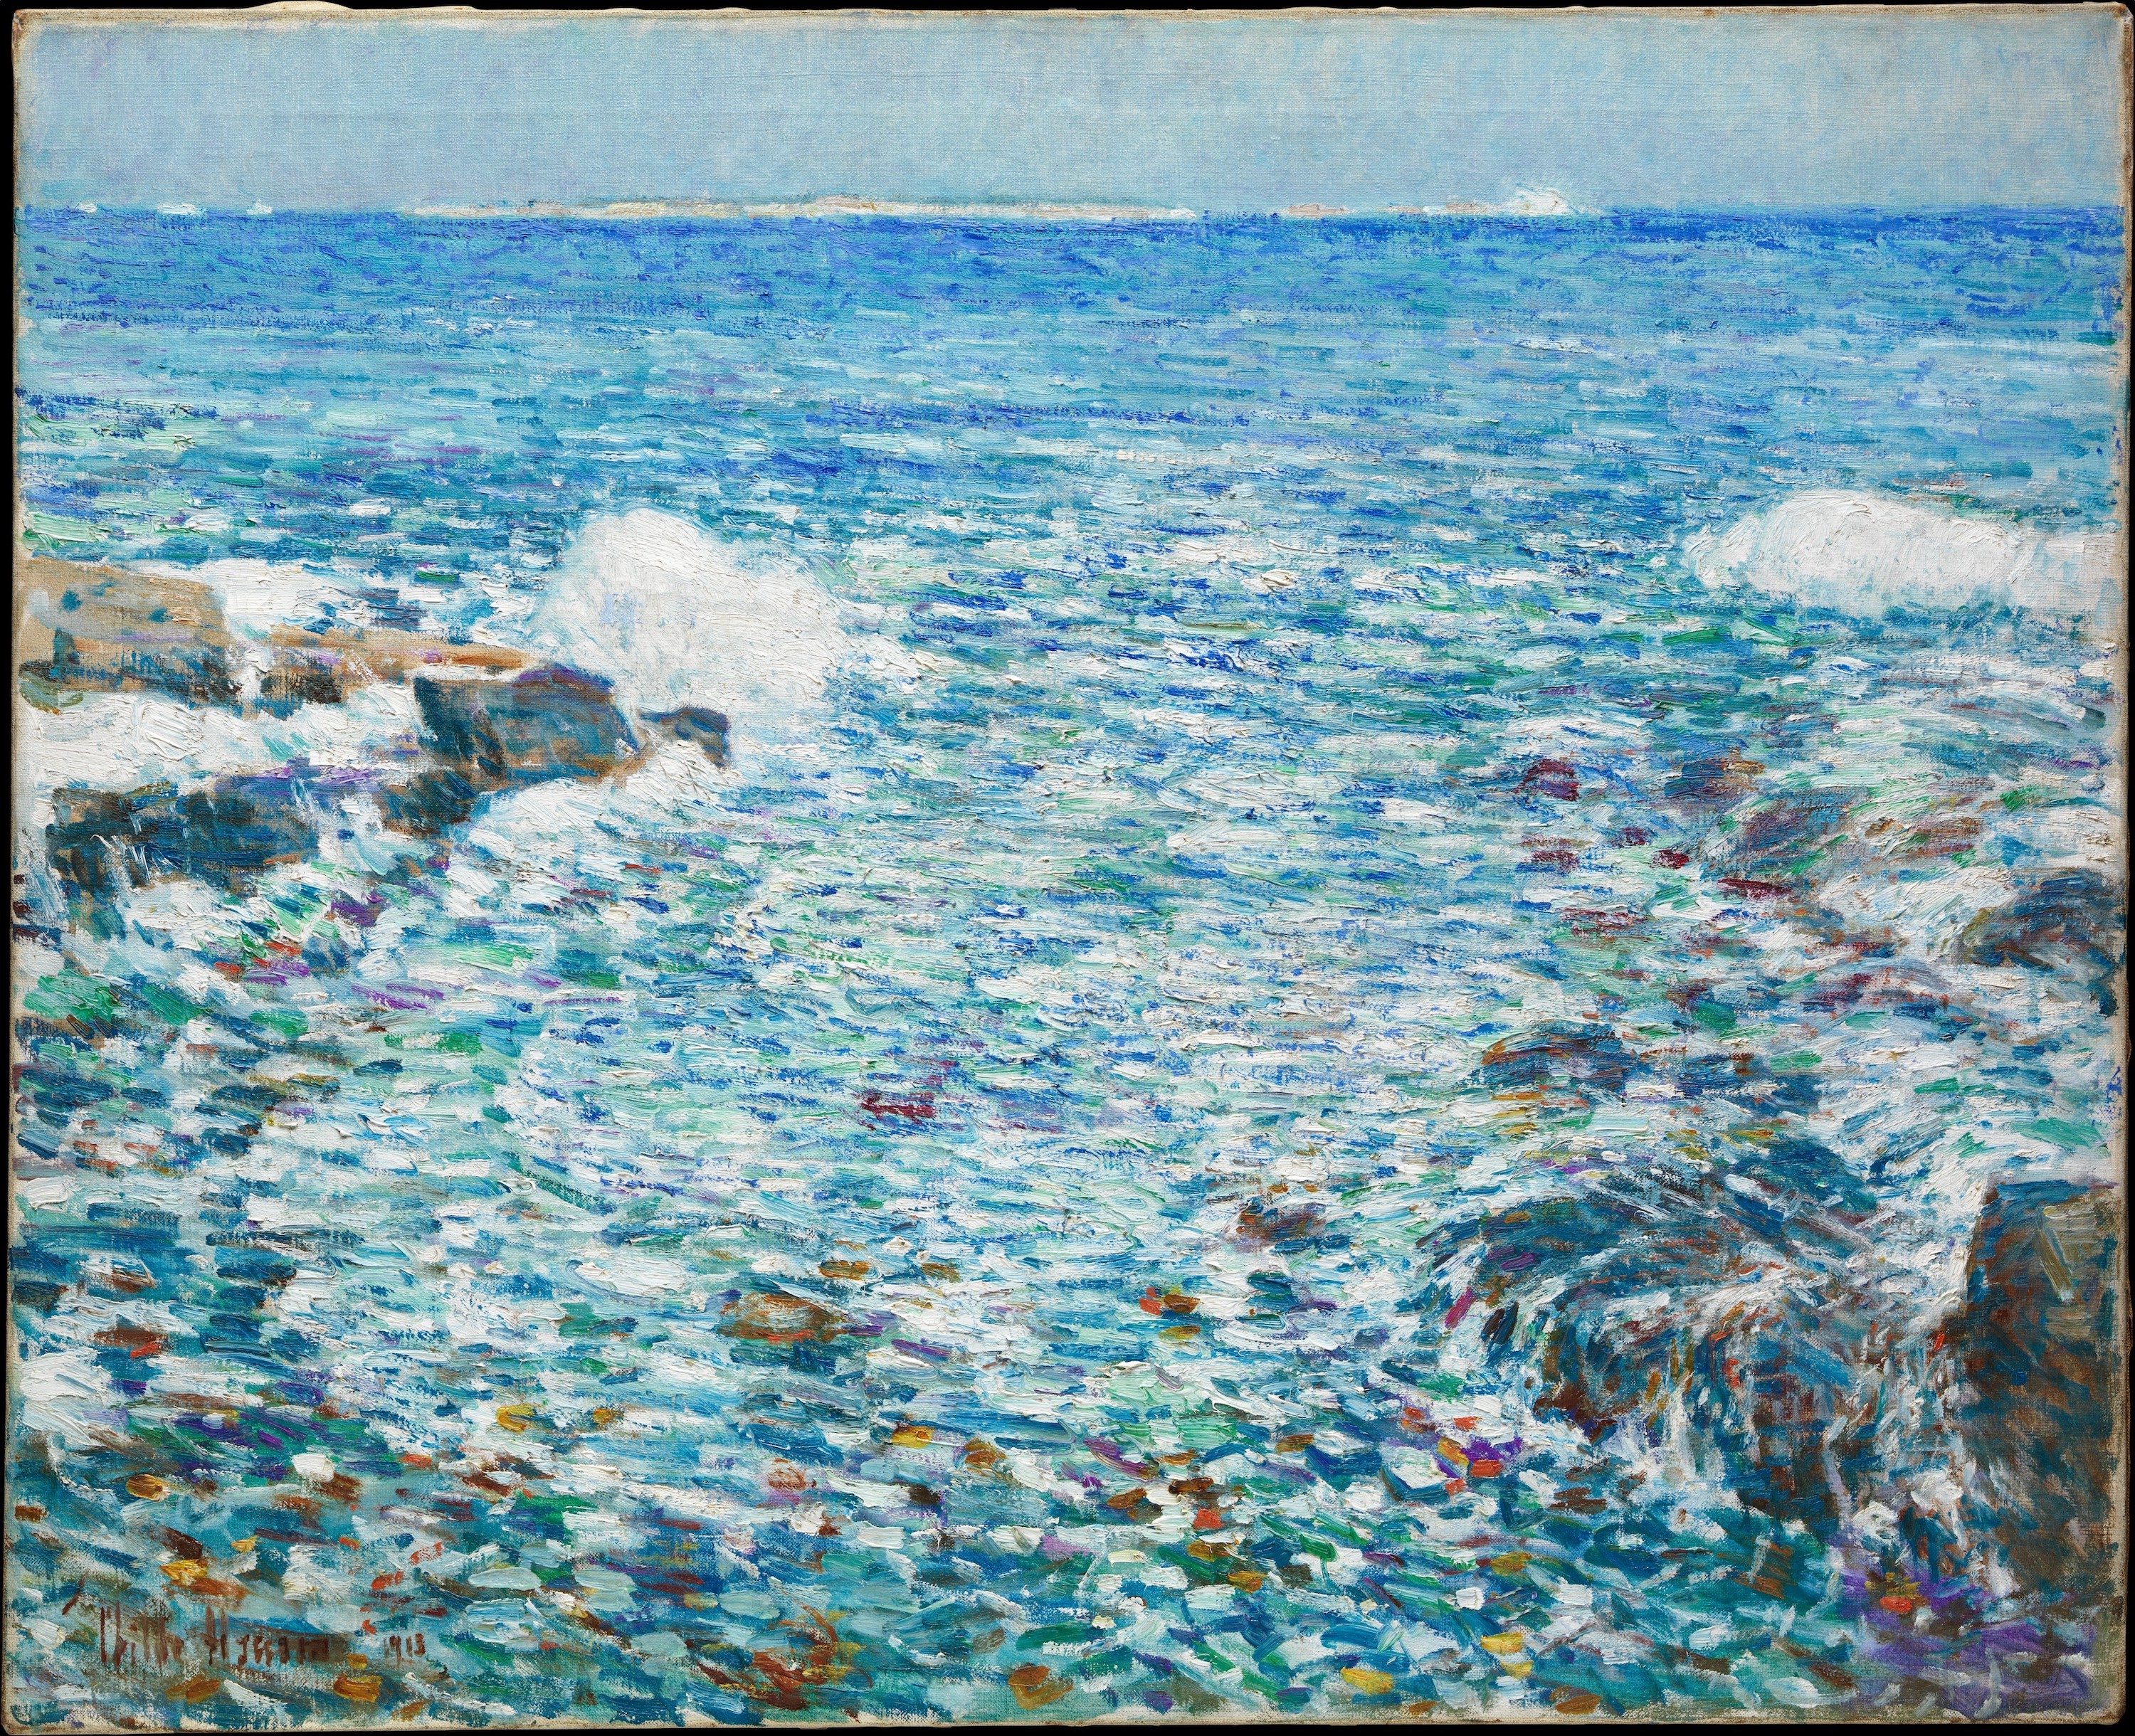 Surf, Isles of Shoals by Frederick Childe Hassam - 1913 - 89.5 x 71.8 cm Metropolitan Museum of Art